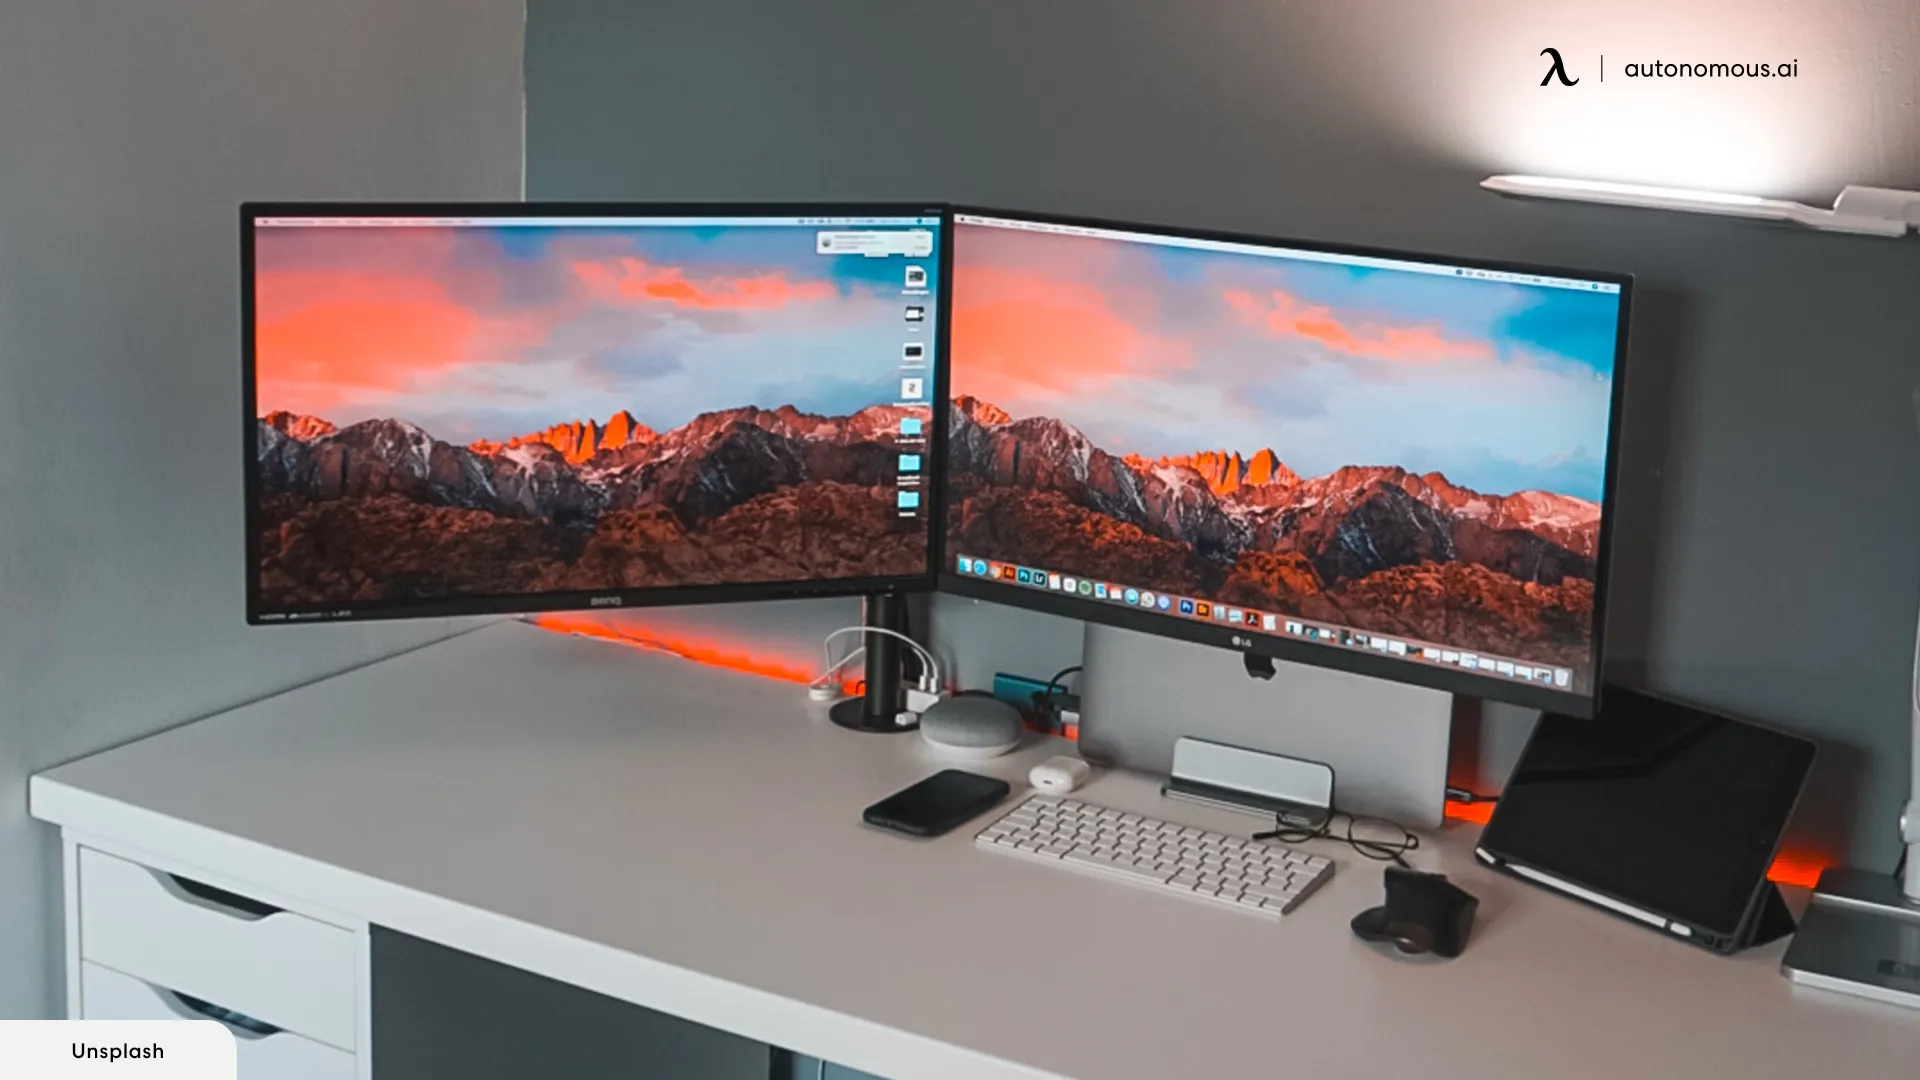 How to Connect Two Monitors to a Laptop When Only One Port Is Available